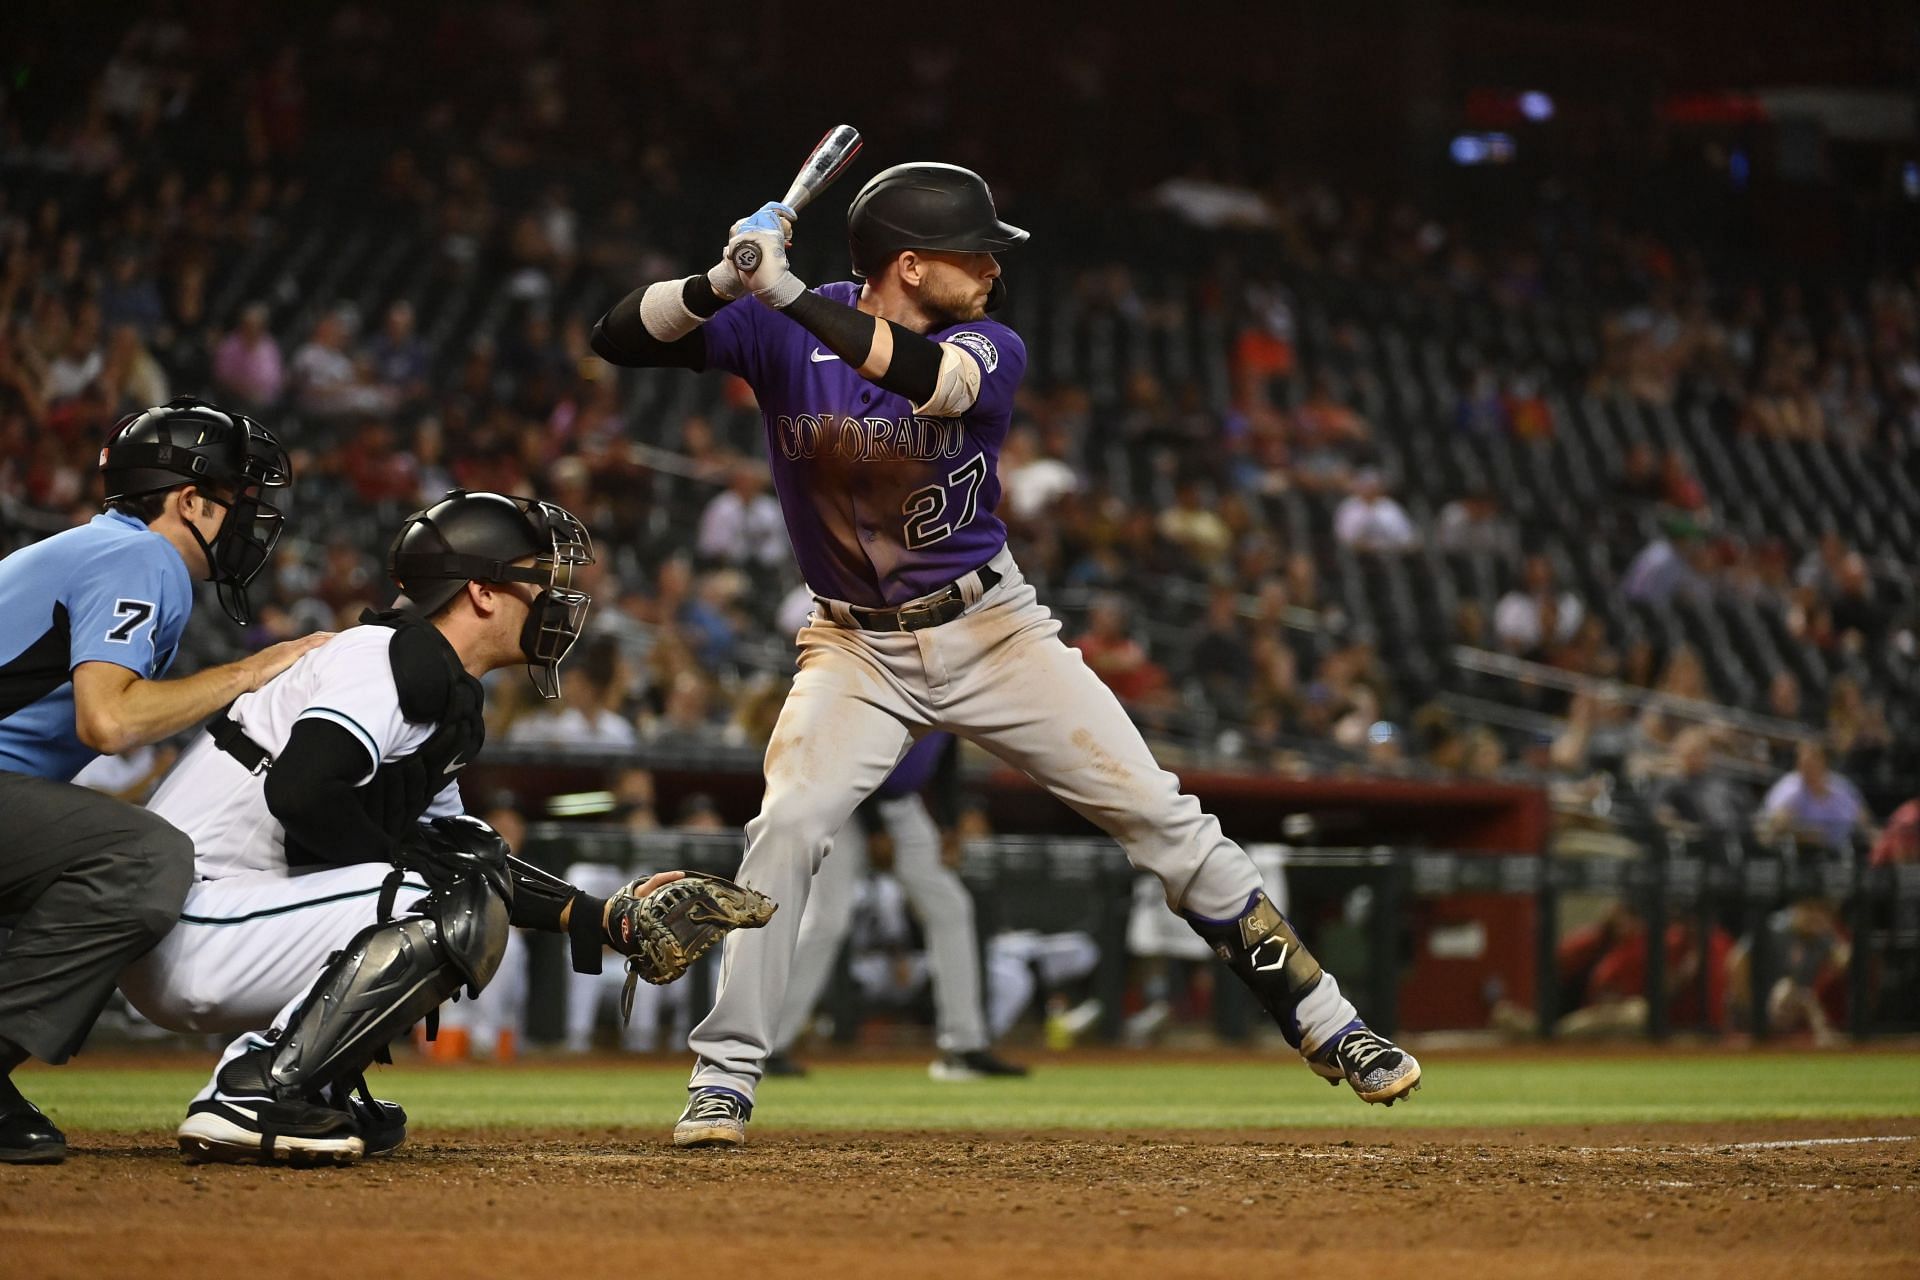 Trevor Story squares up last season against the Colorado Rockies, 2022 will be his first with the Red Sox